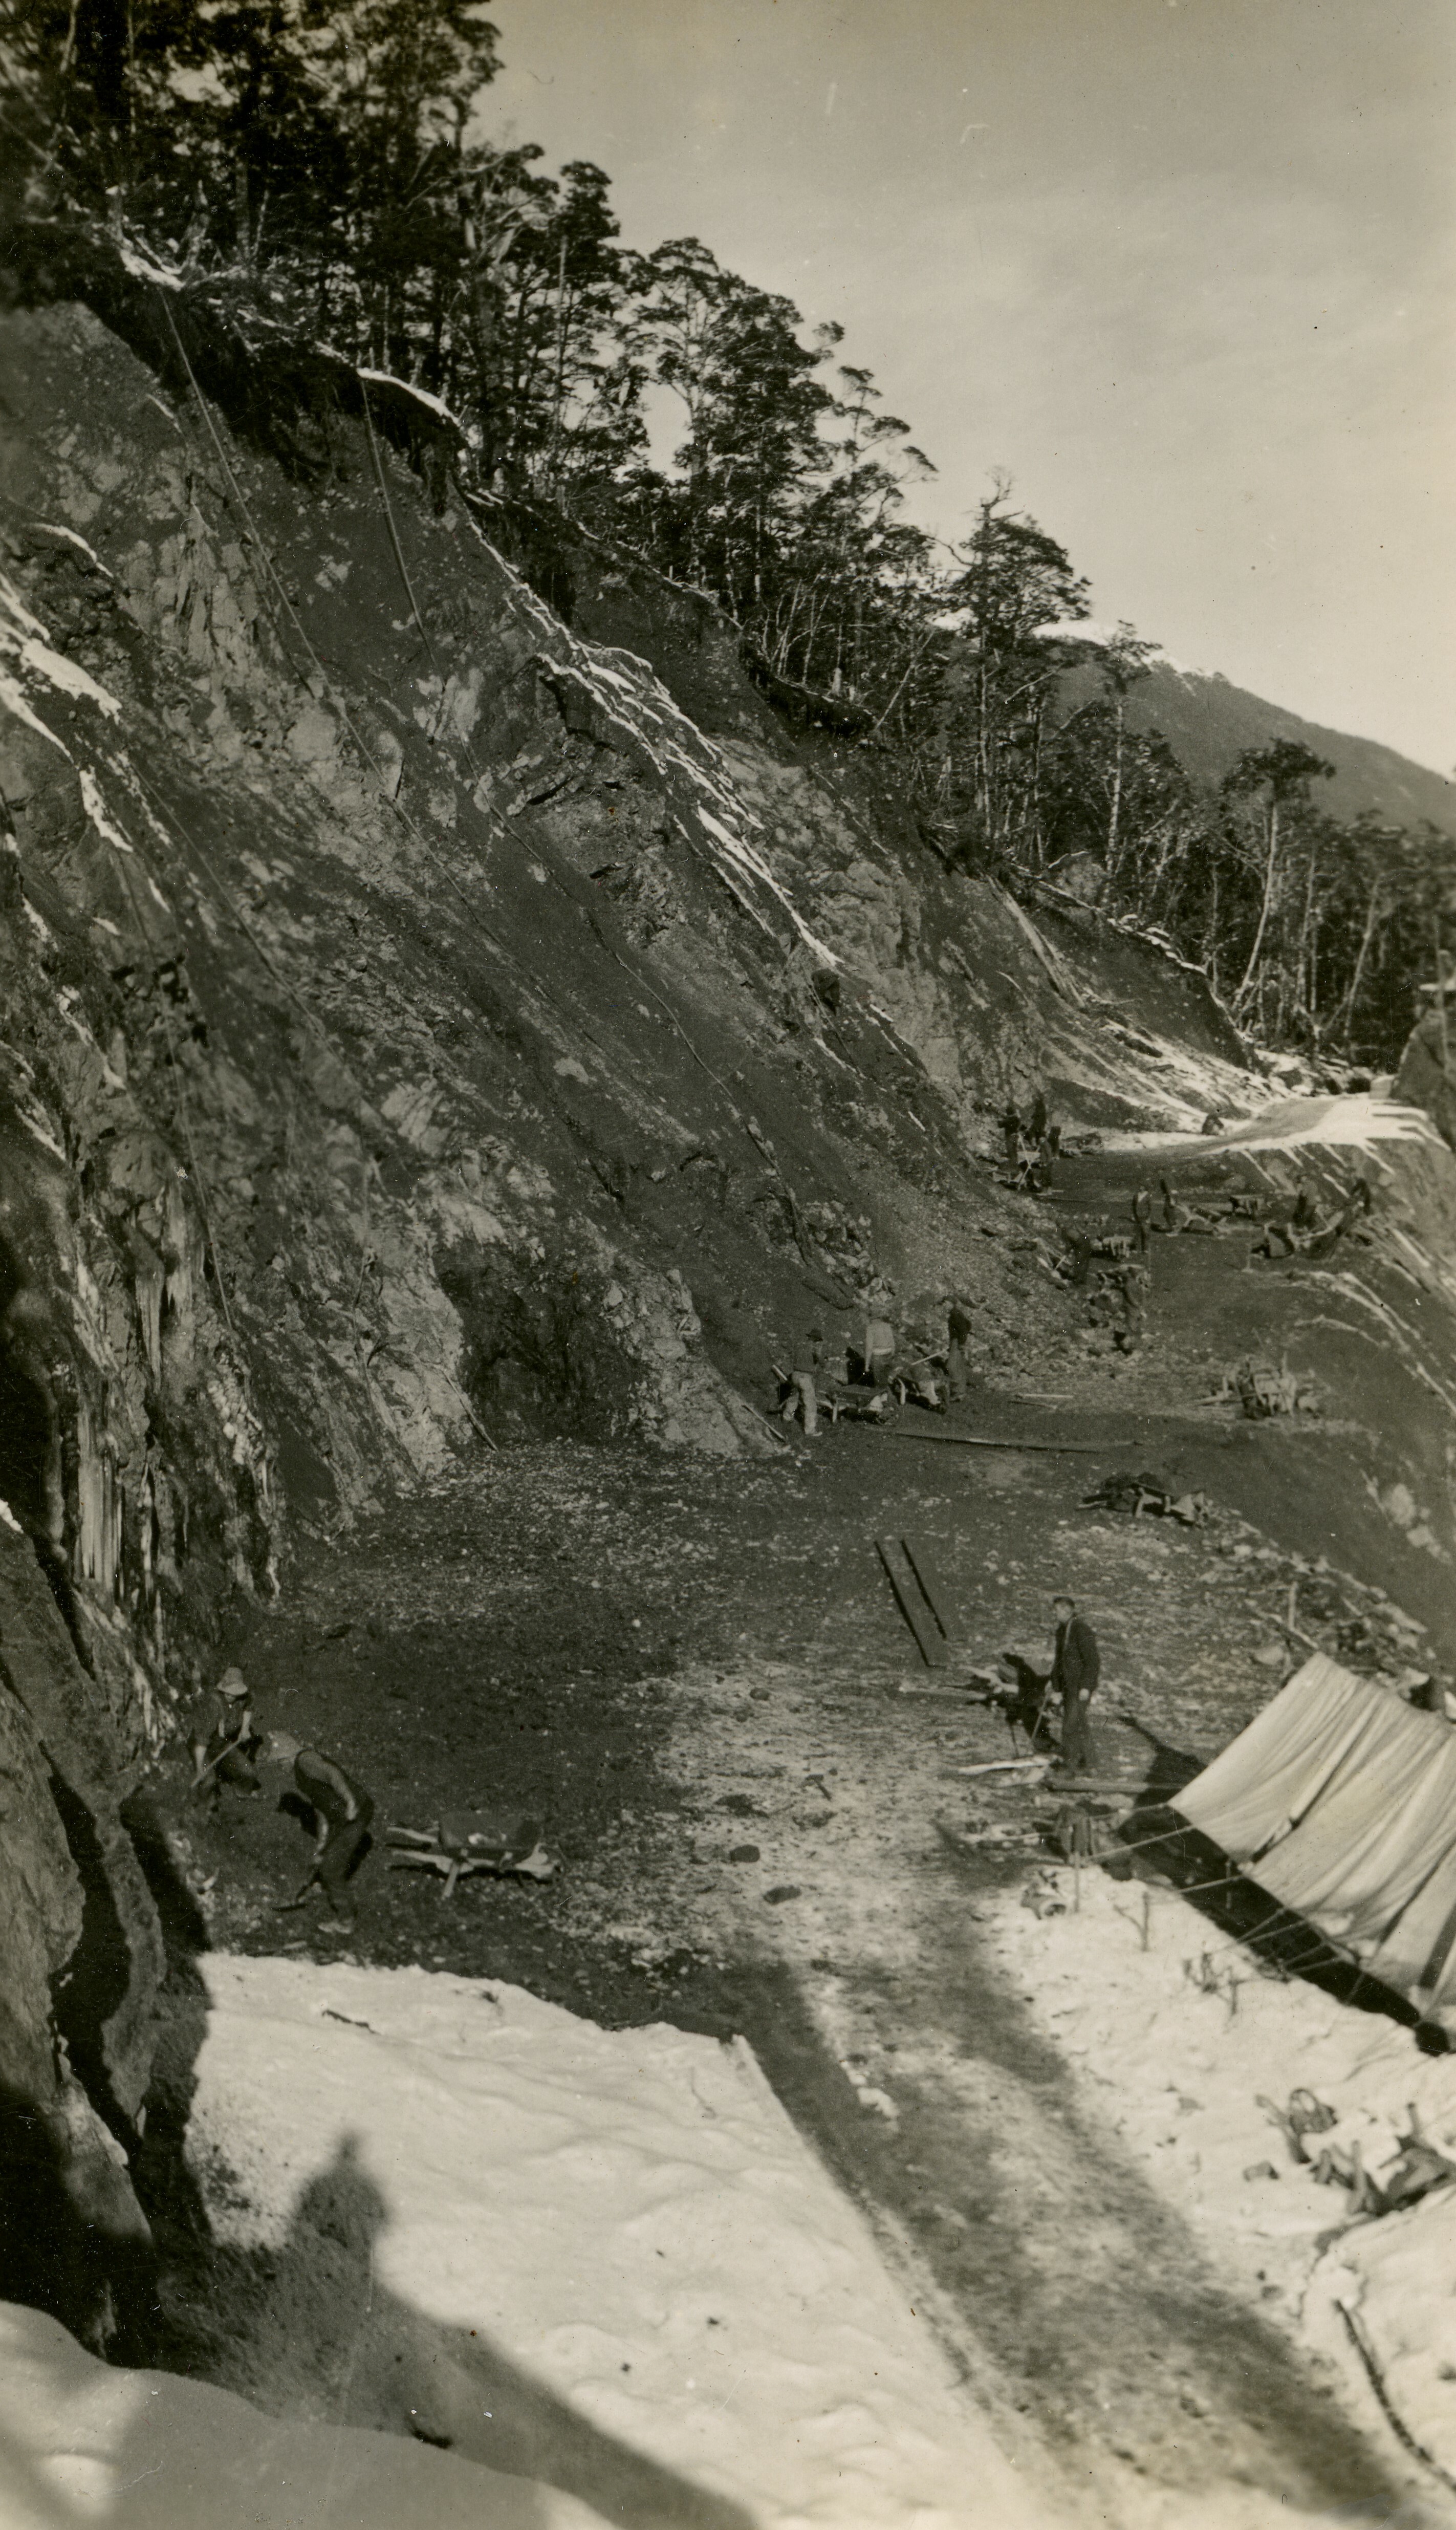 Lewis Pass road under construction in the 1930s. Canterbury Museum 2018.13.26. No known copyright restrictions